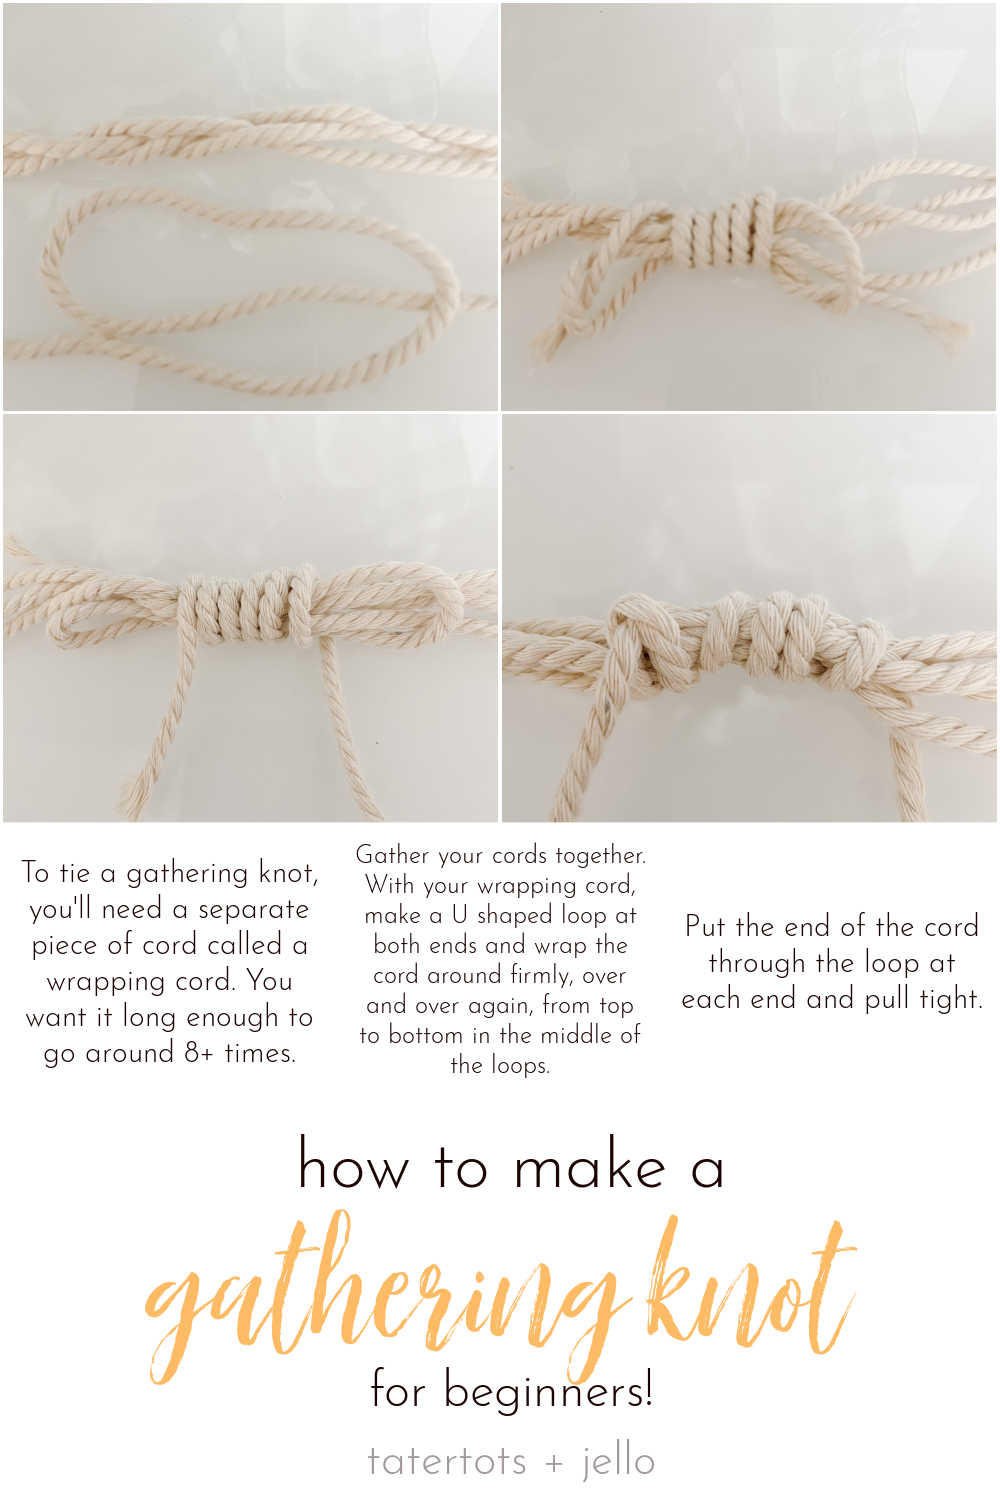 Make a Macrame Market Bag for Beginners! One of the best parts of spring and summer is fresh produce at the farmer's market. Make an easy macrame market bag with this easy DIY! 